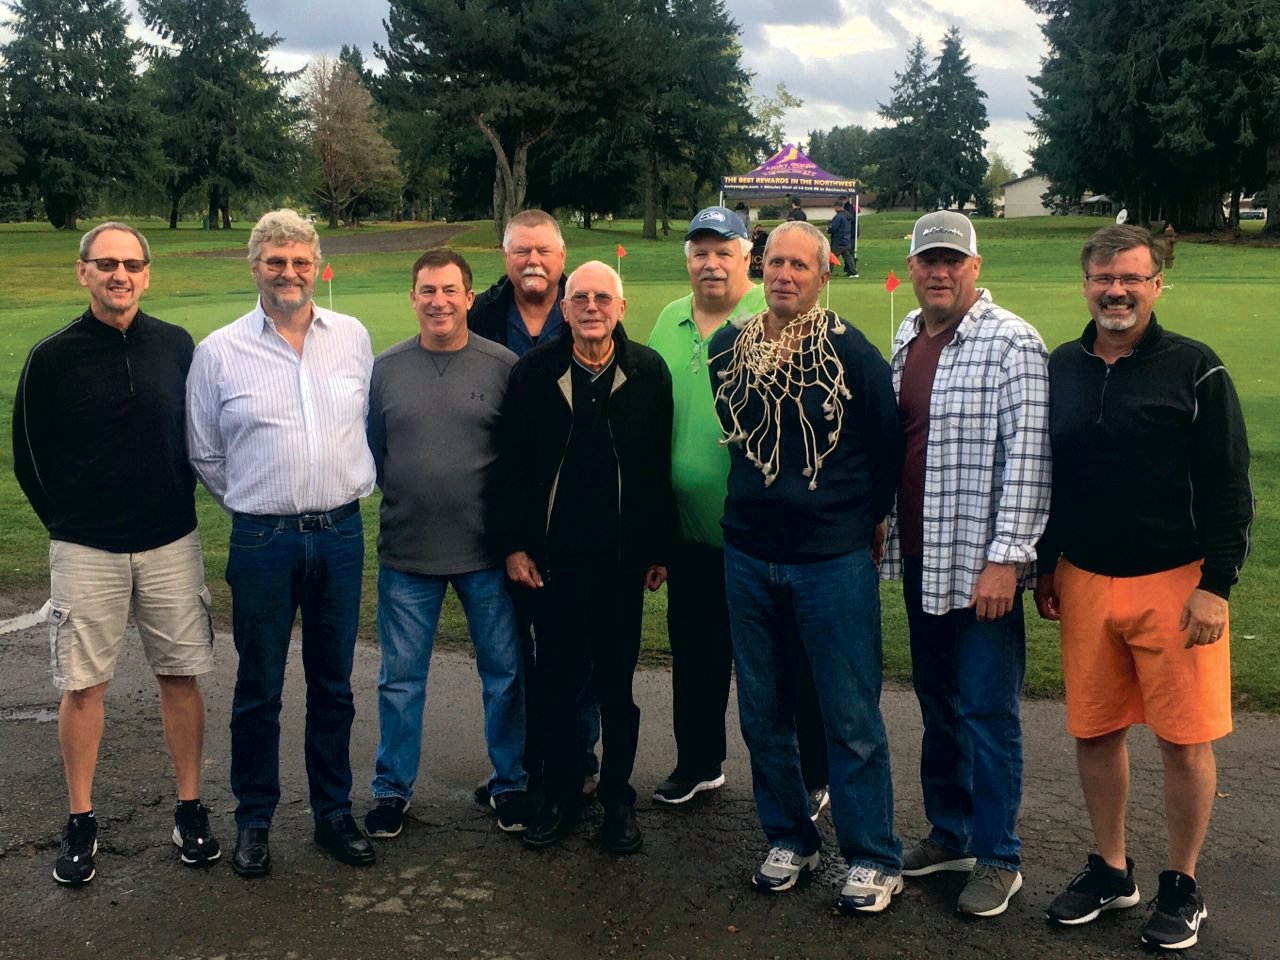 Former Centralia High School boys basketball coach Ron Brown (center) poses with members of the 1979 state champion Tiger basketball team at Newaukum Valley Golf Course during a fund-raiser golf tournament.